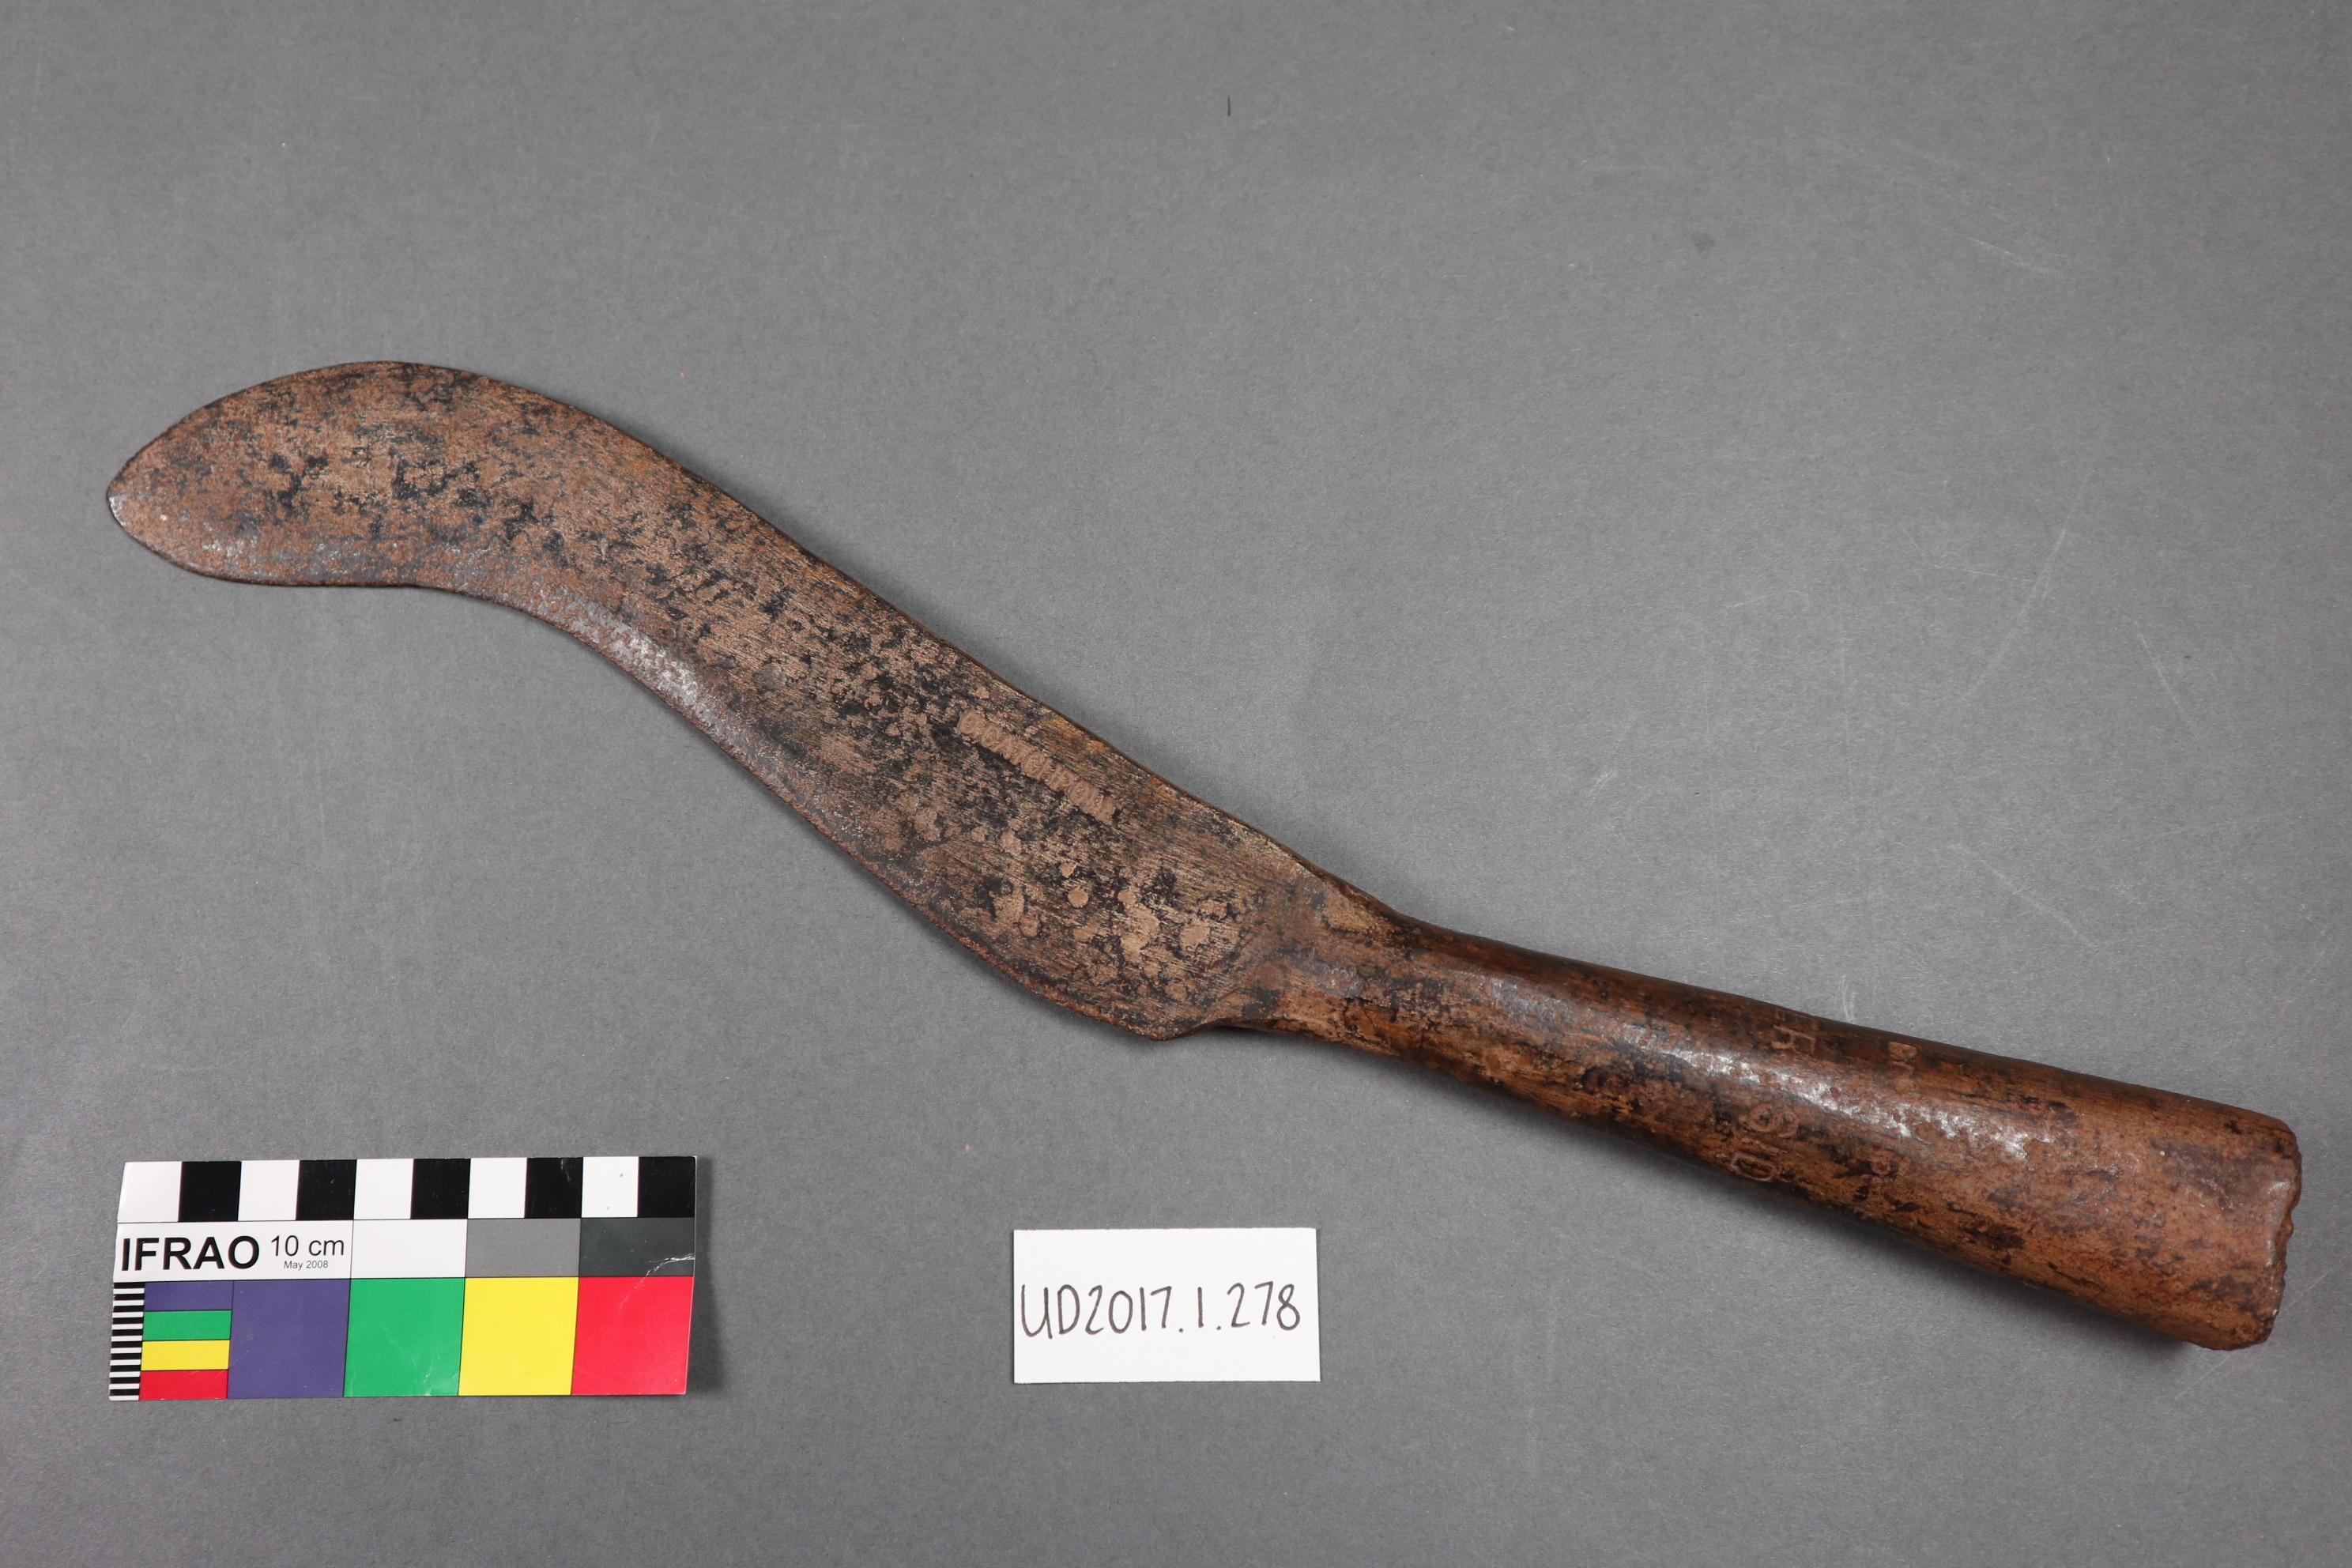 This metal tool likely belonged to Oliver Dimmack Catchpole. Canterbury Museum 2017.1.278